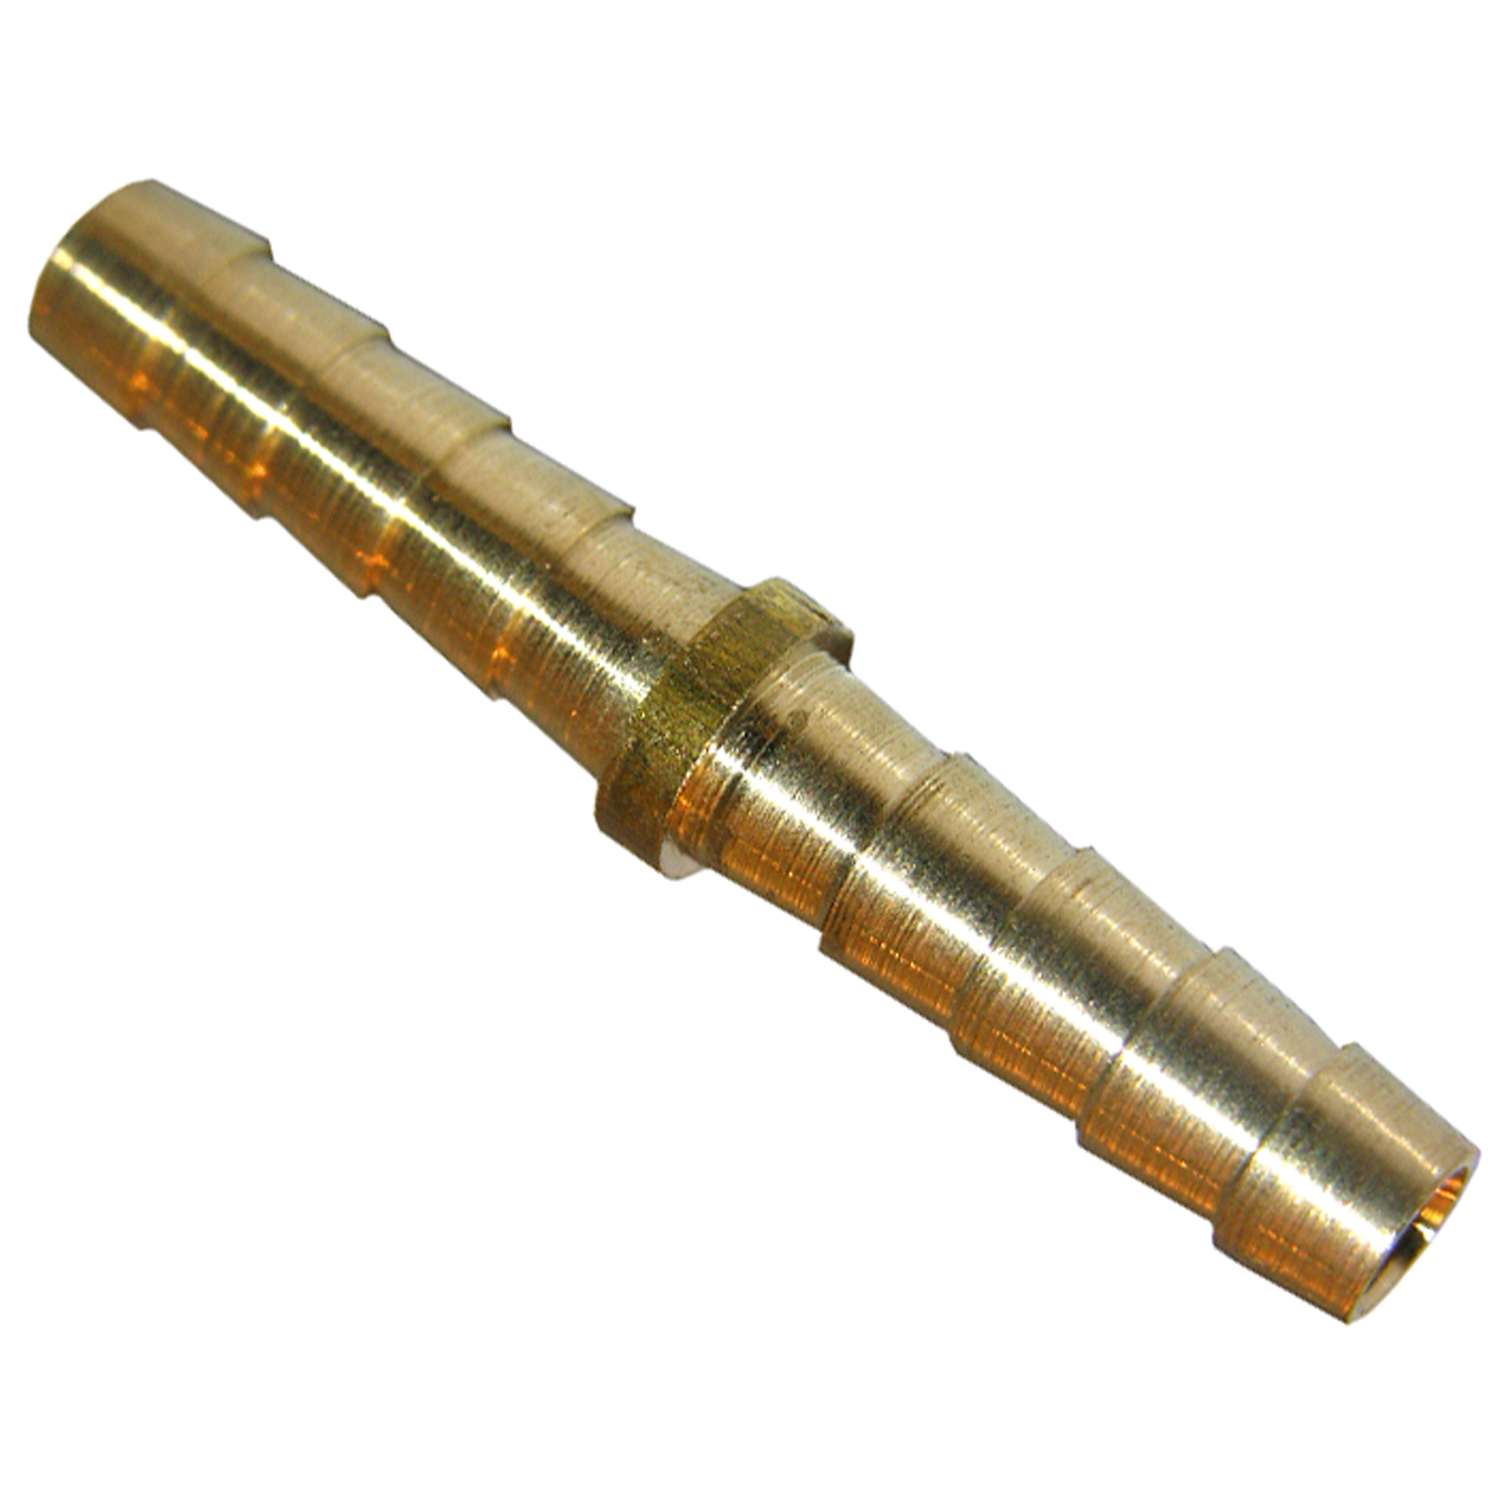 17-7507 Coupling, 3/16 in, Barb, Brass